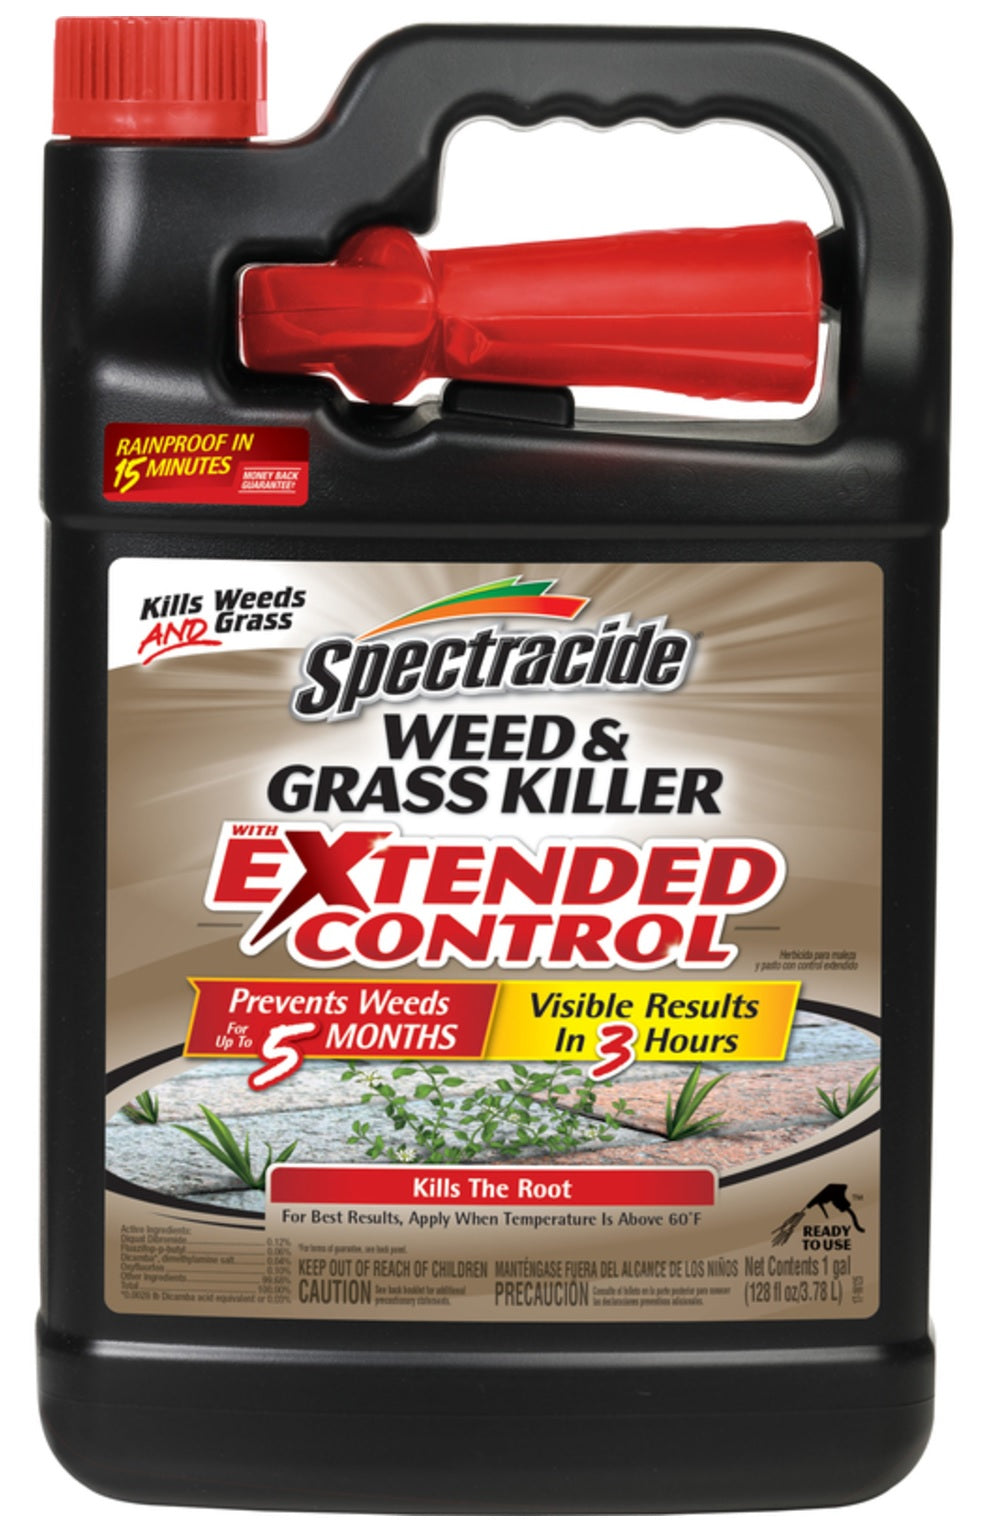 Spectracide HG-96218 Extended Control Weed & Grass Killer, 1 Gallon